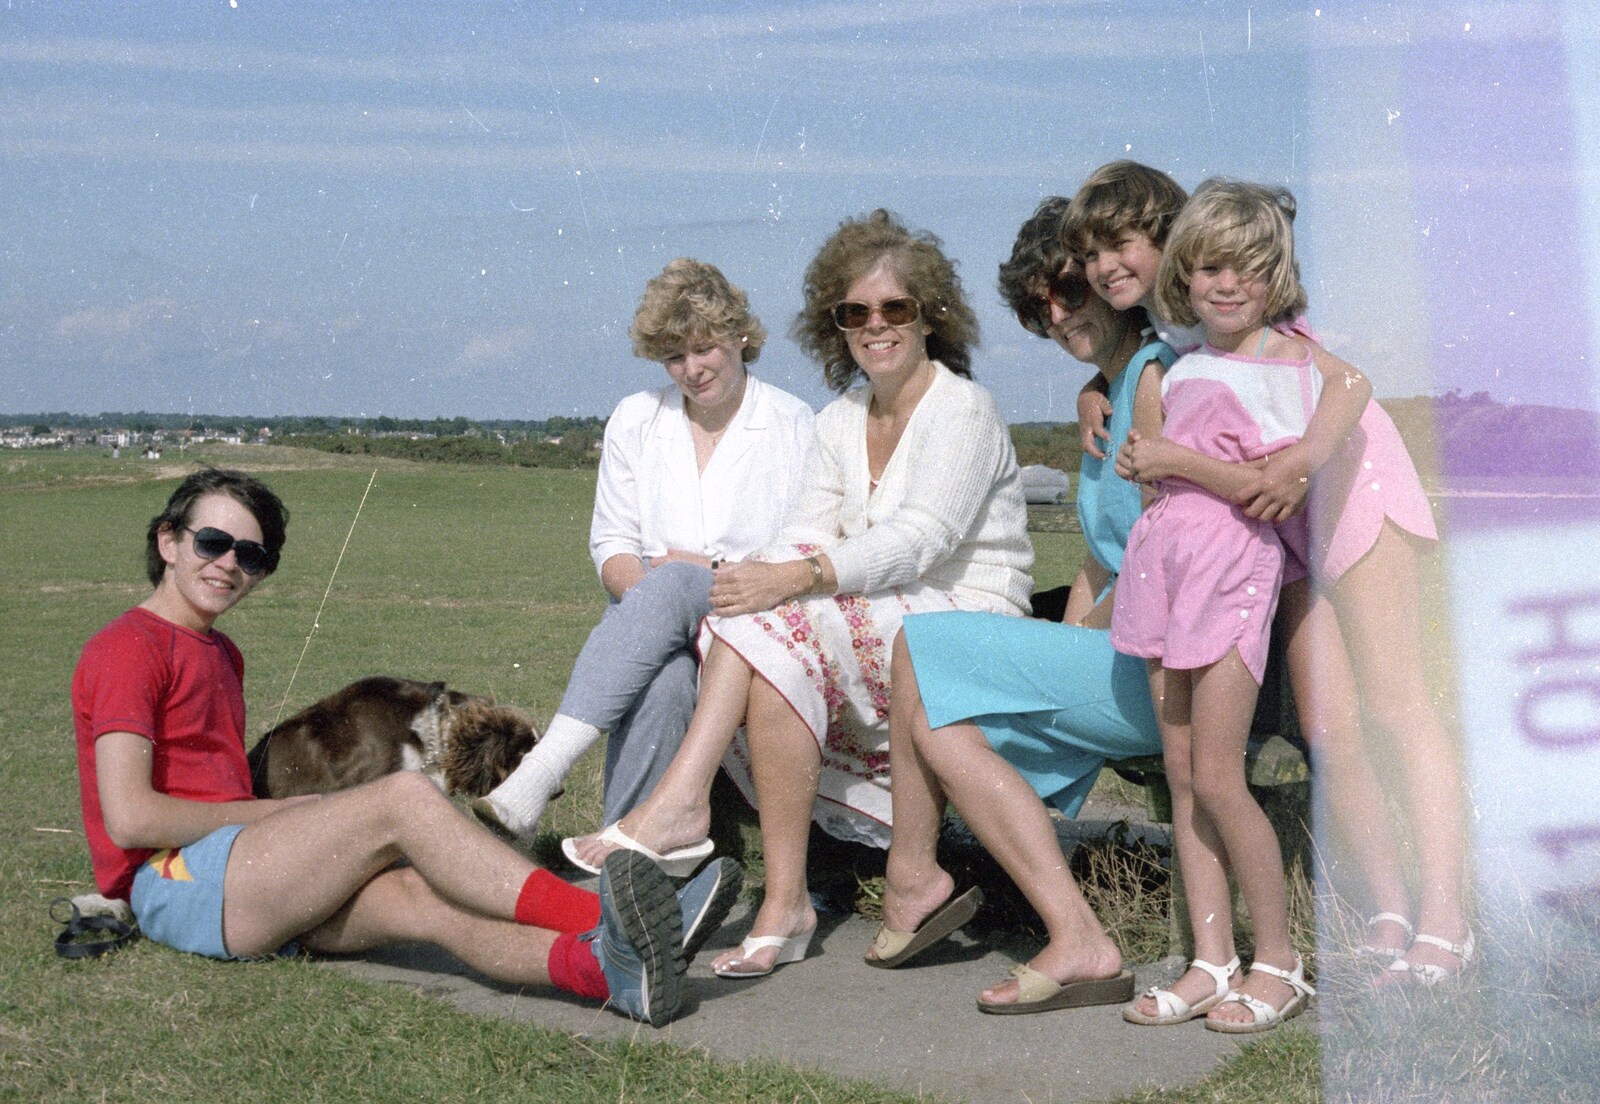 Phil, Anna, Bernice and a bunch of others from Brockenhurst College Exams and Miscellany, Barton on Sea, Hampshire - 10th June 1985